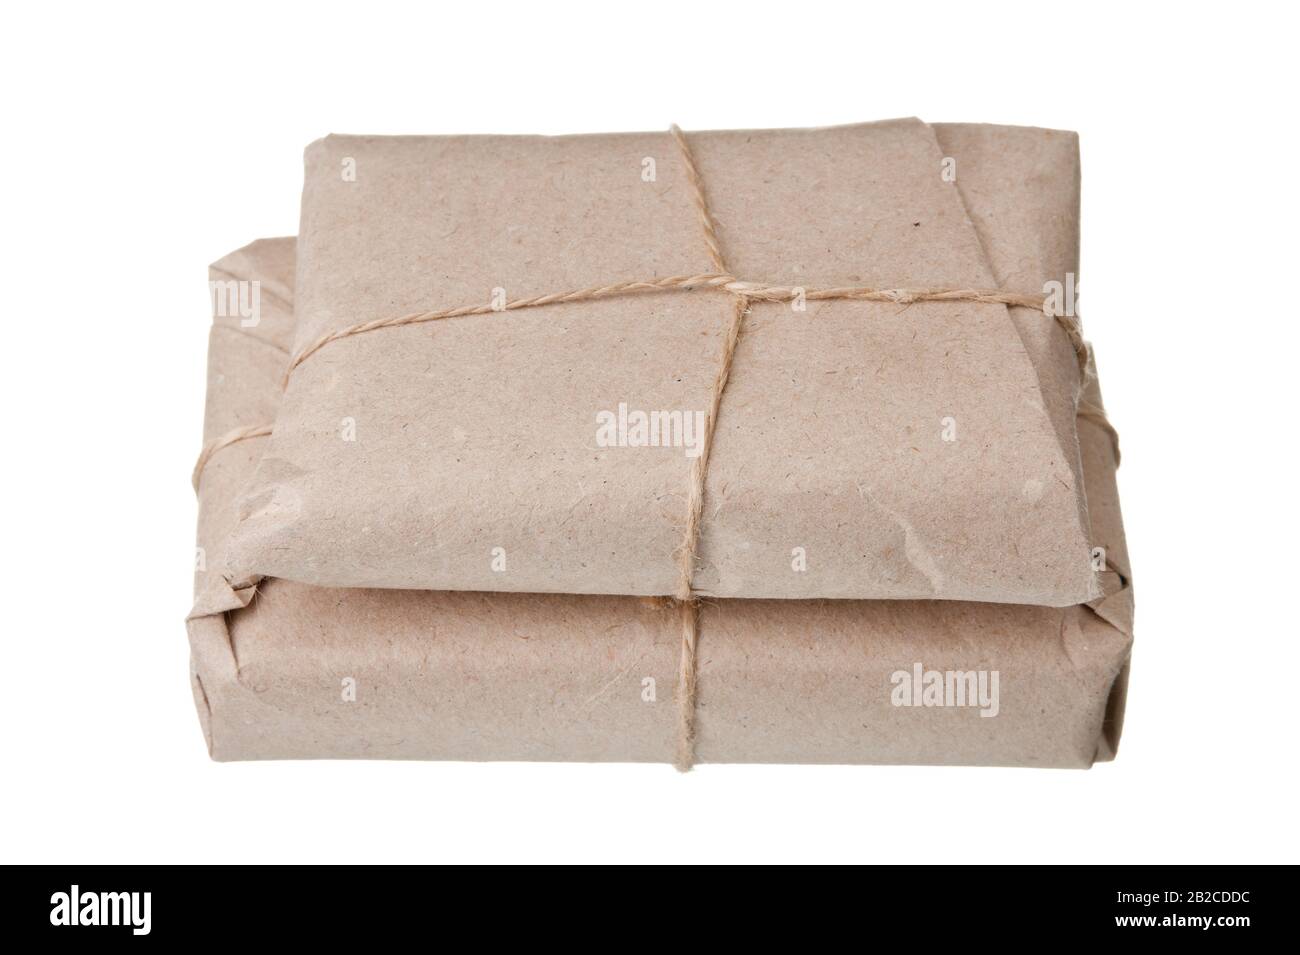 Parcel wrapped with brown packing paper Stock Photo by ©AndriiGorulko  9972809